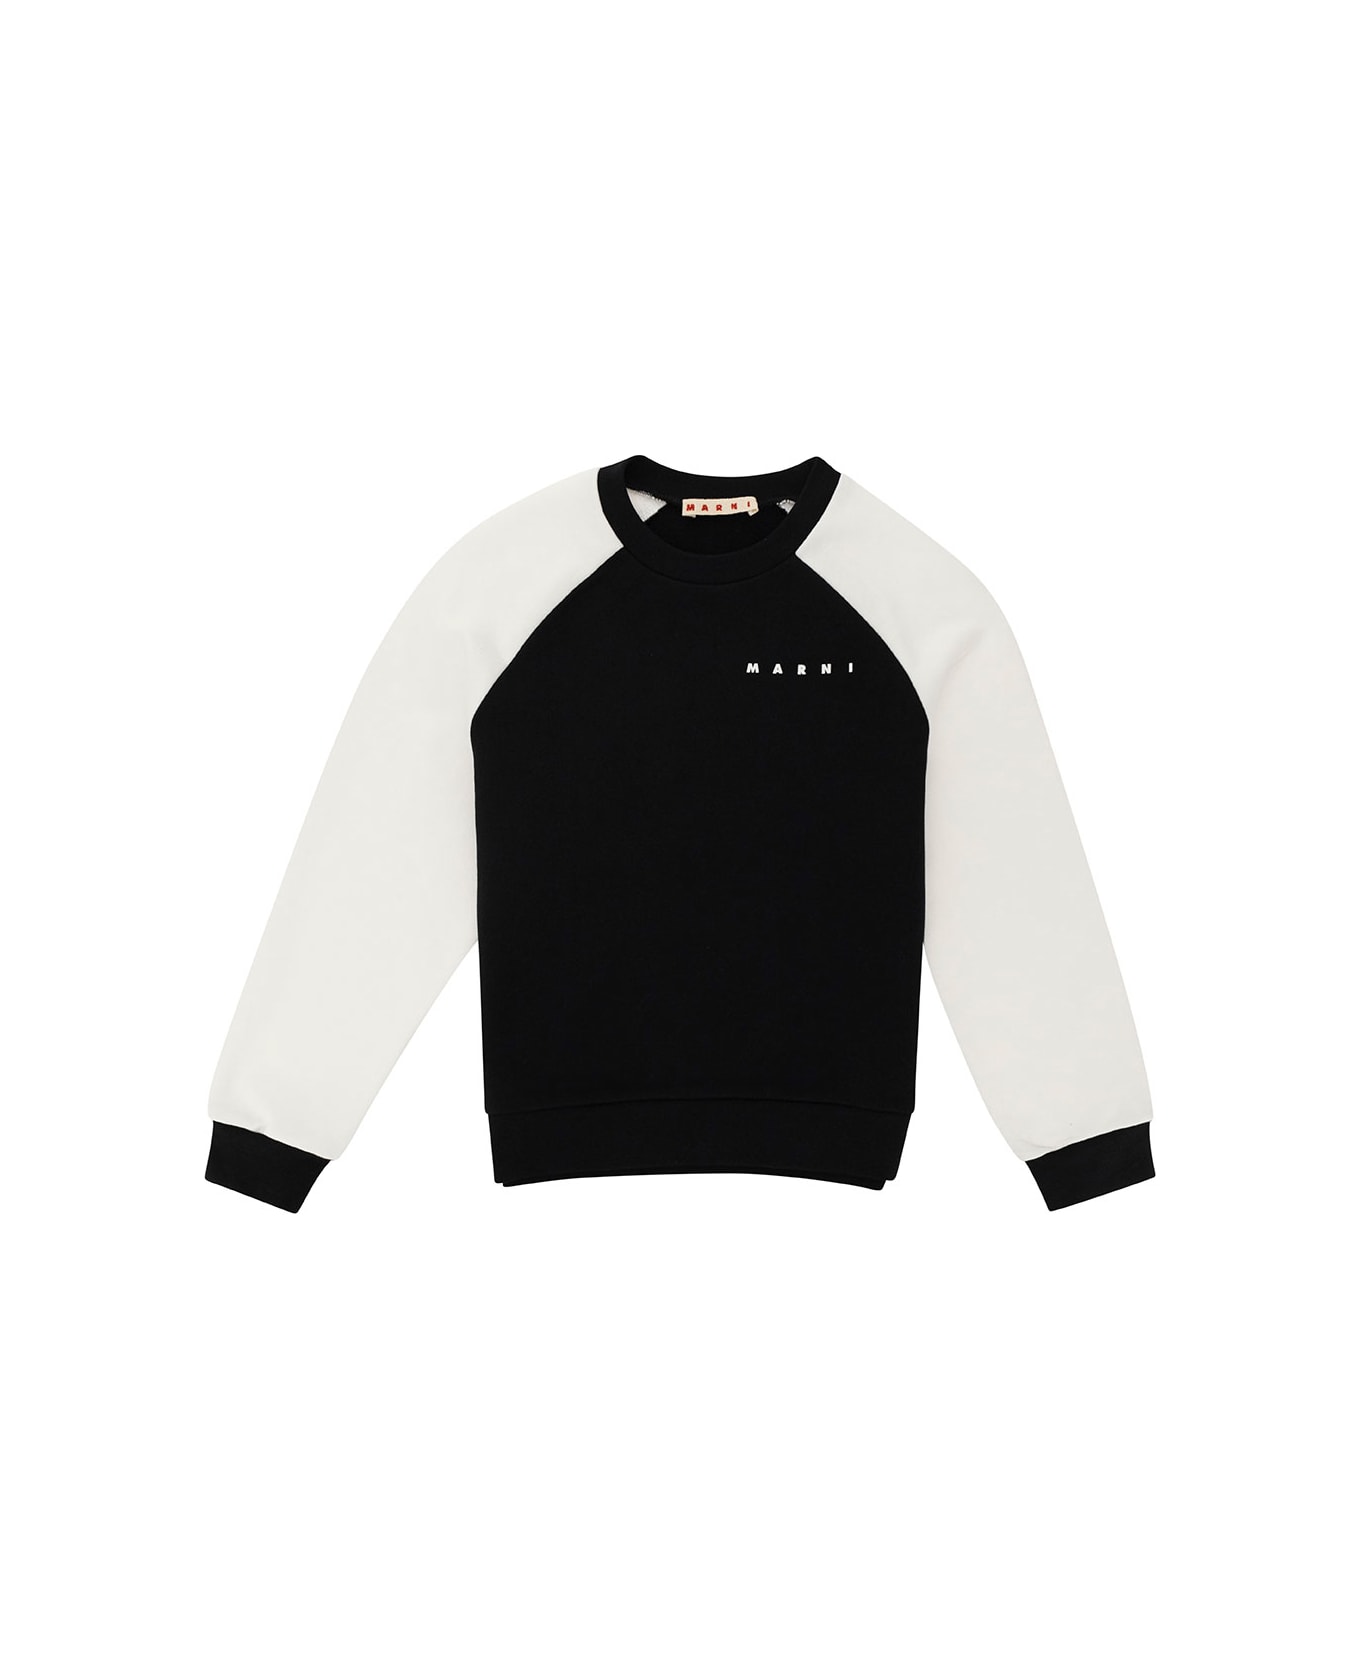 Marni Black And White Crewneck Sweatshirt With Contrastinf Sleeves In Cotton Boy - Black